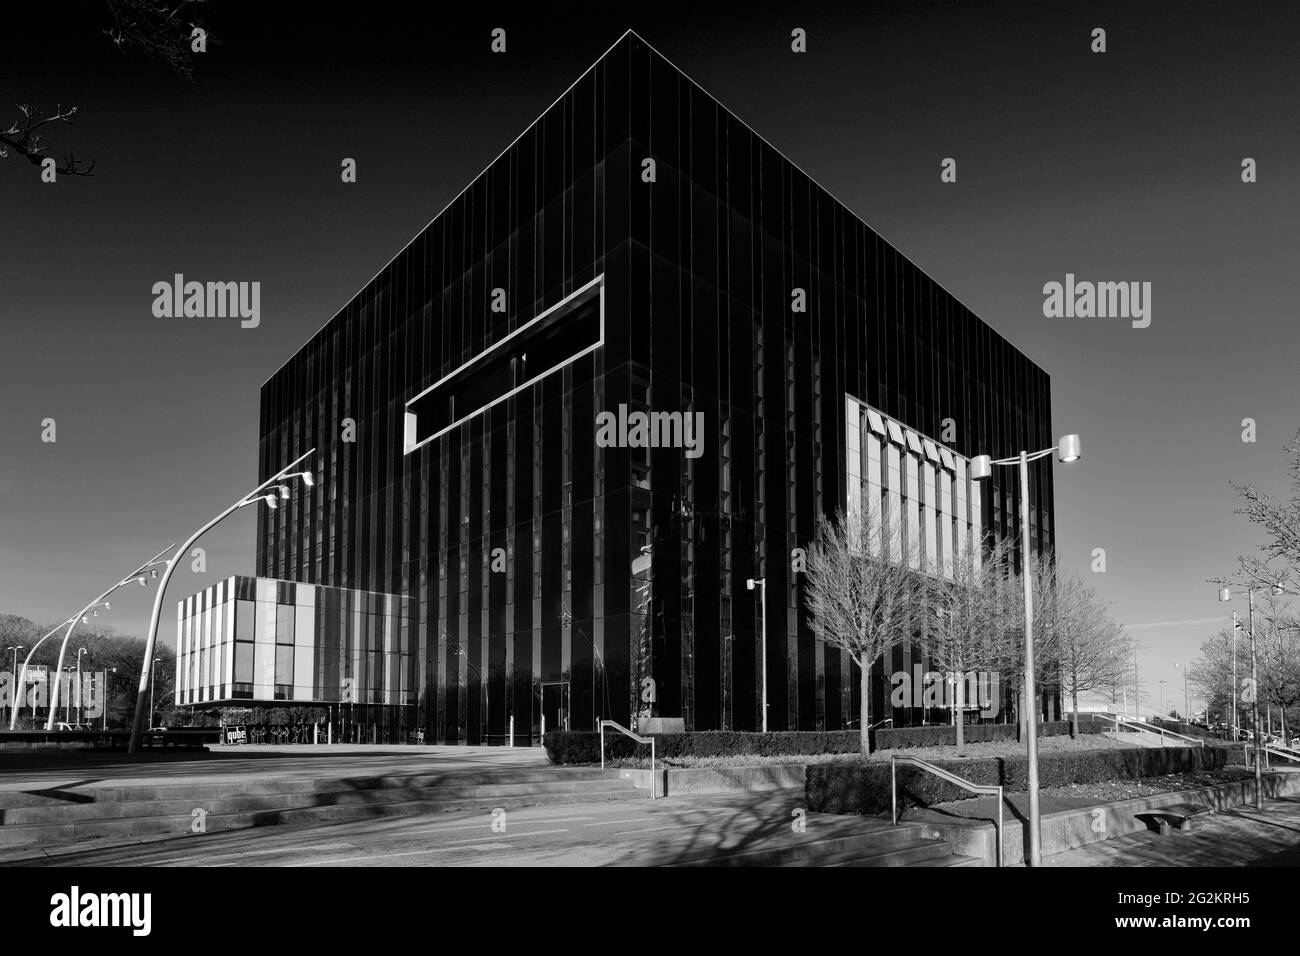 The Core building, Corby Cube, George Street, Corby, Northamptonshire ...